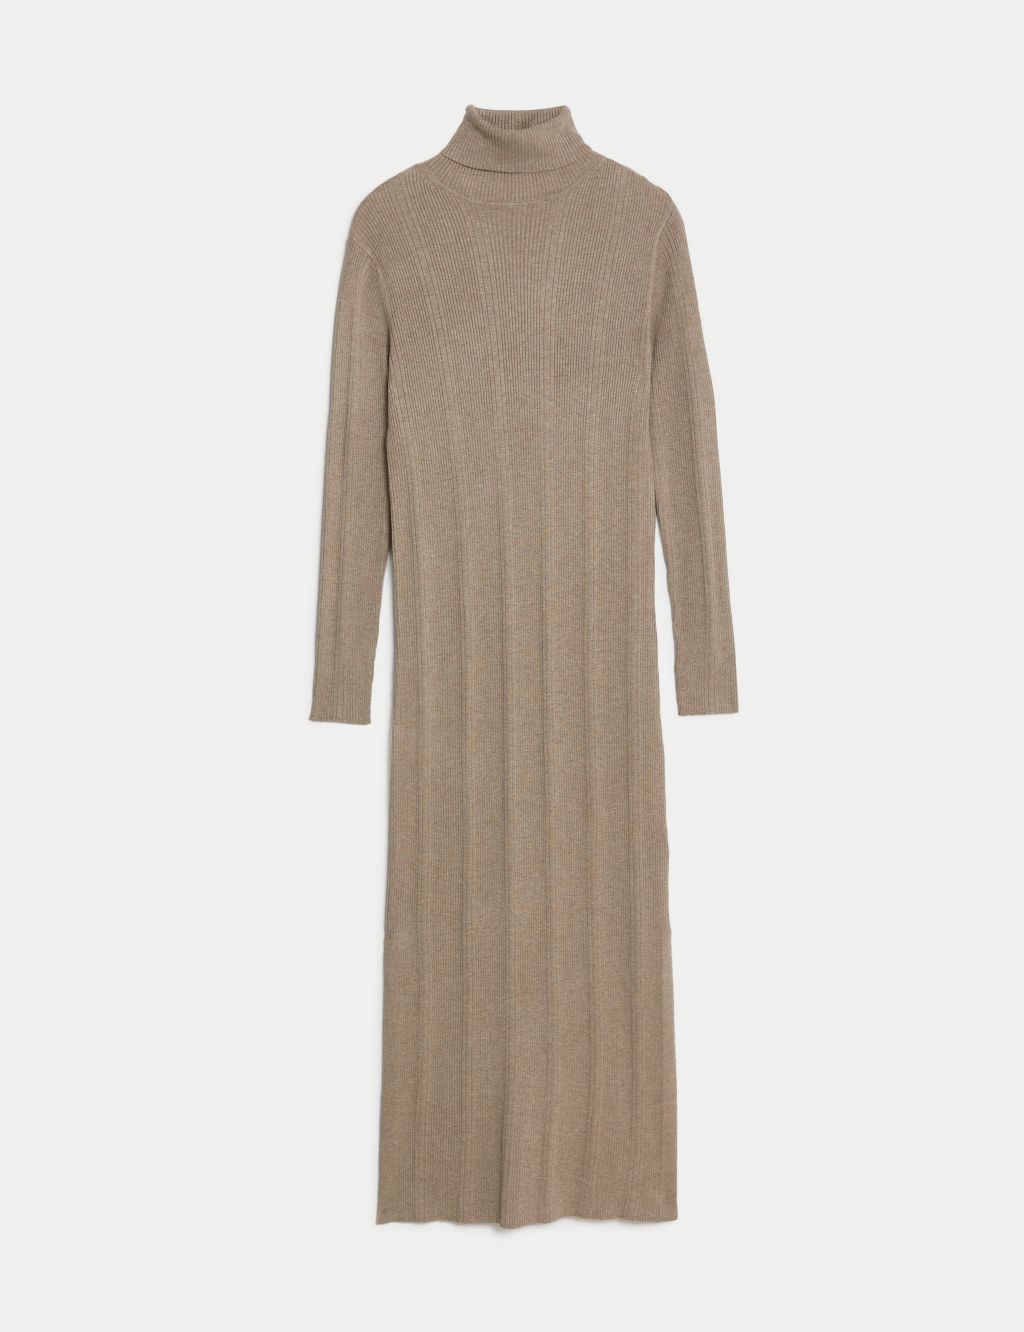 Knitted Ribbed Roll Neck Midi Dress image 2